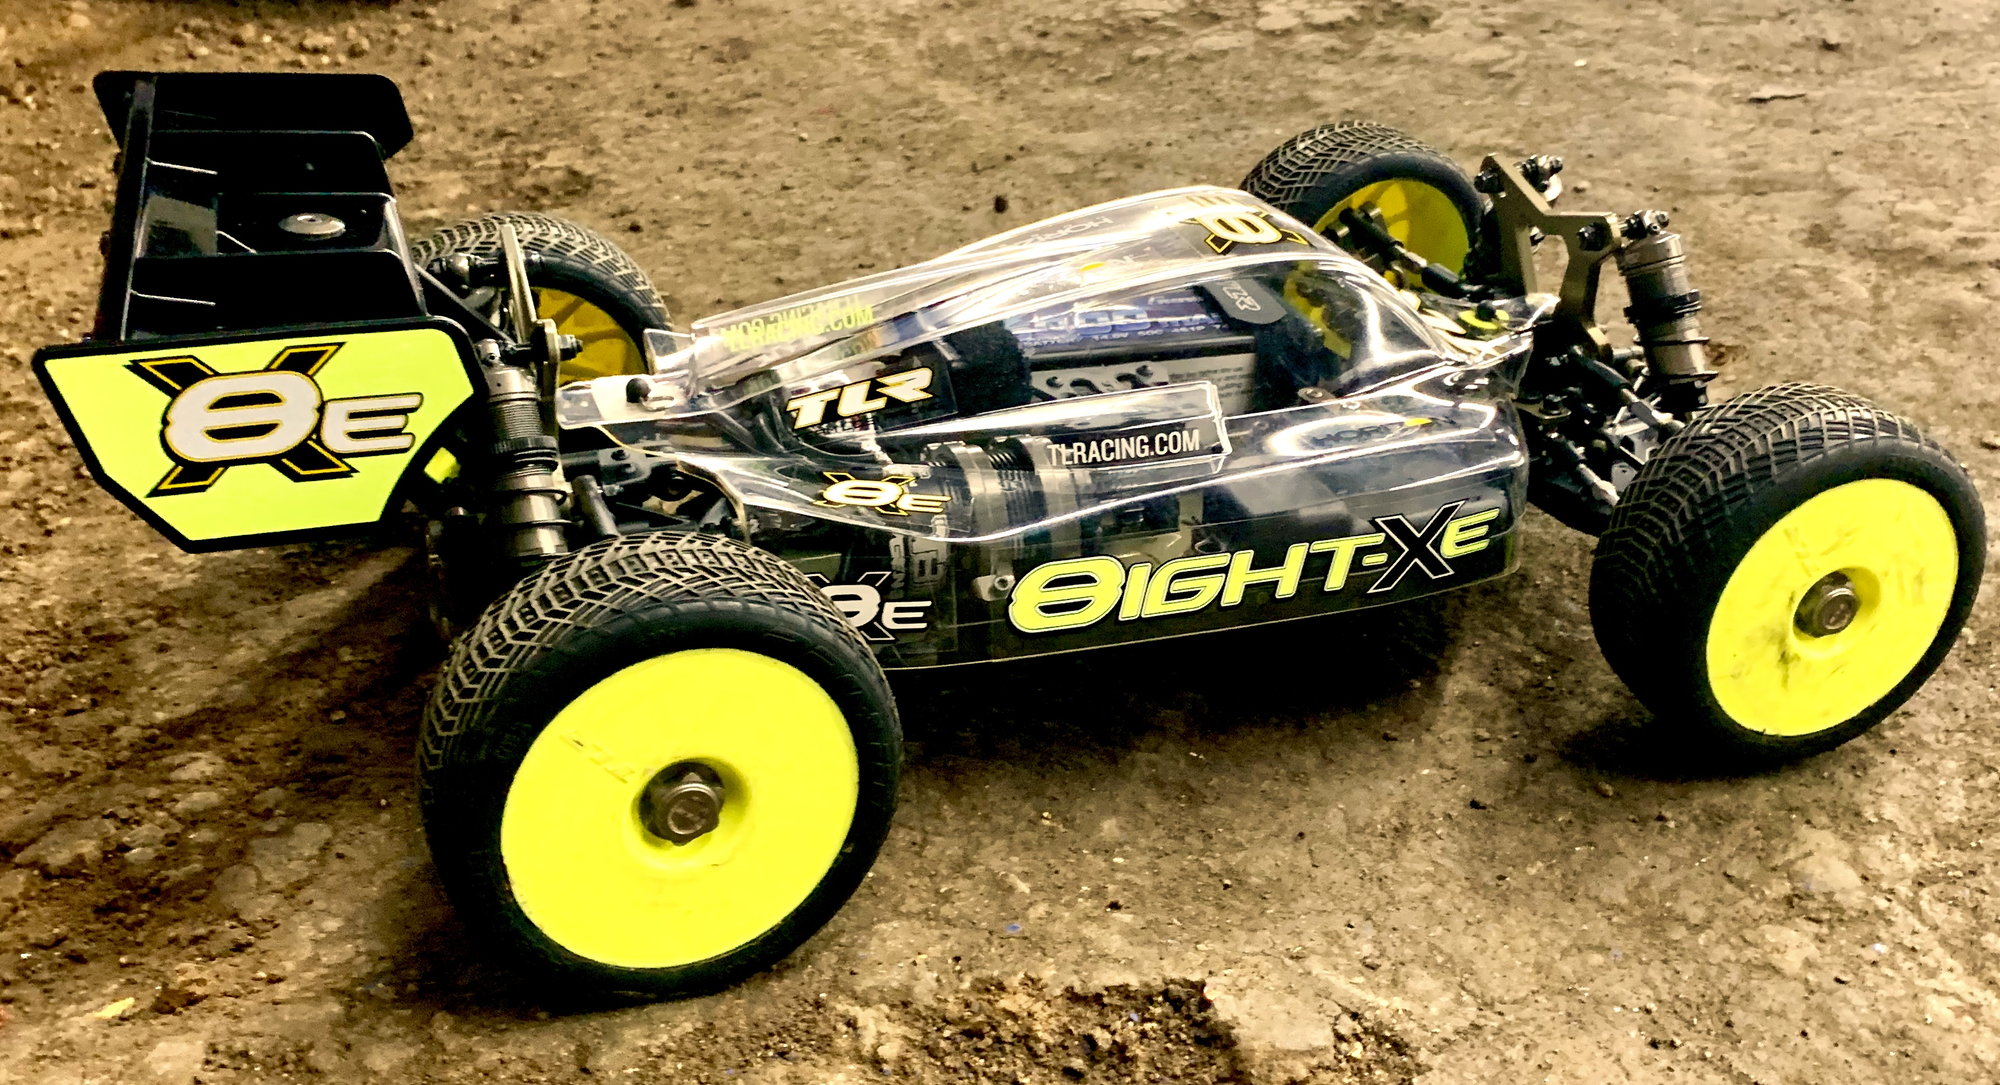 TLR 8ight X-E - Page 26 - R/C Tech Forums